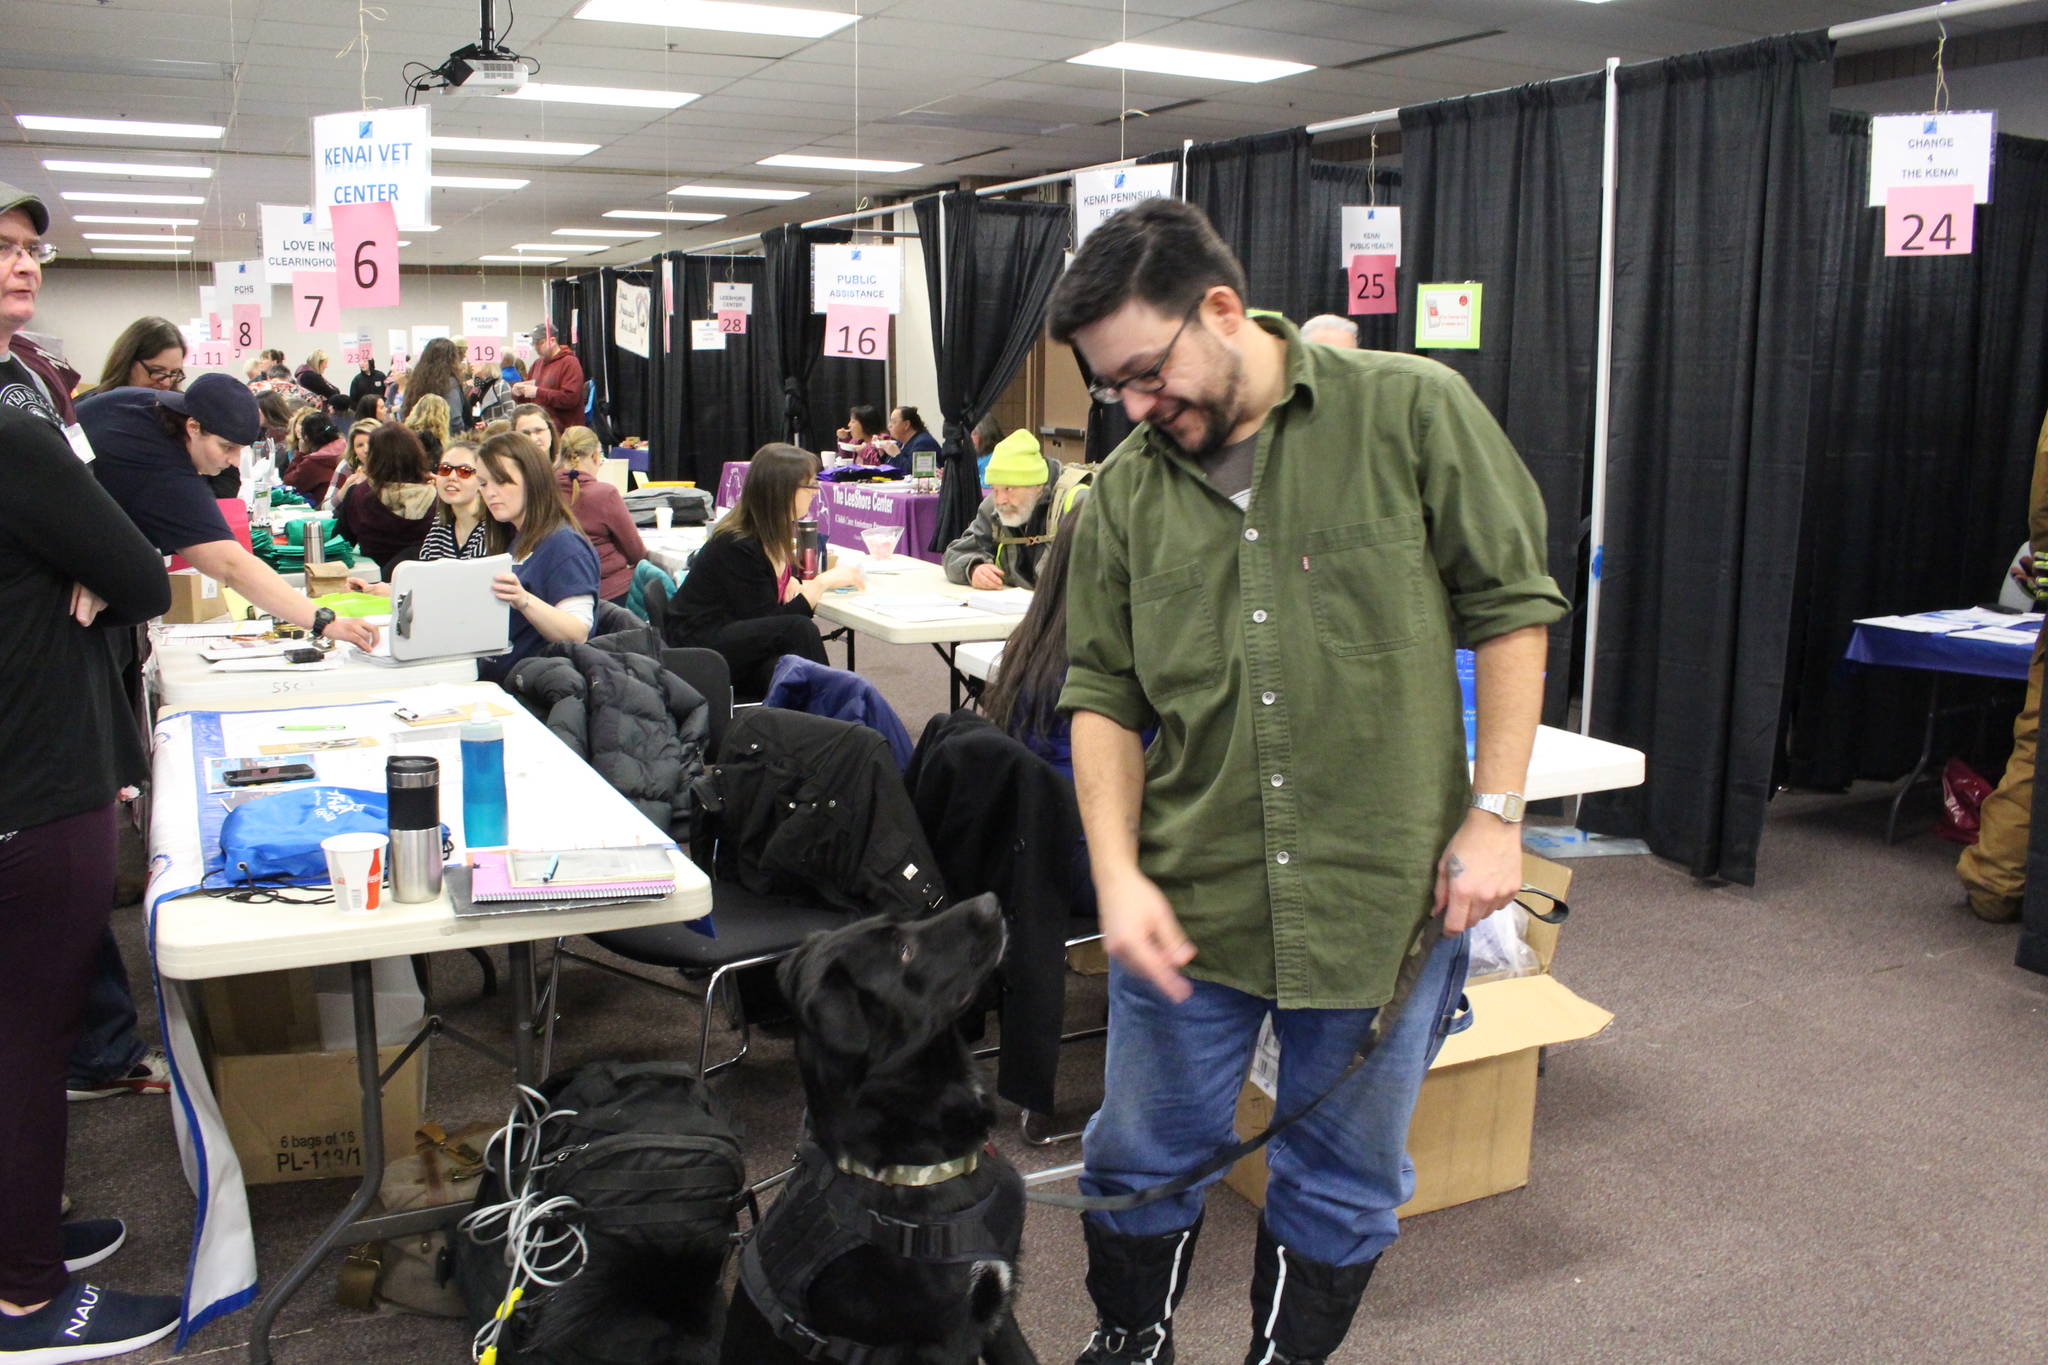 Kenneth Russell and his dog Ichabod, aka “Icky,” attend the 2020 Project Homeless Connect event at the Soldotna Regional Sports Complex in Soldotna, Alaska, on Jan. 29, 2020. (Photo by Brian Mazurek/Peninsula Clarion)